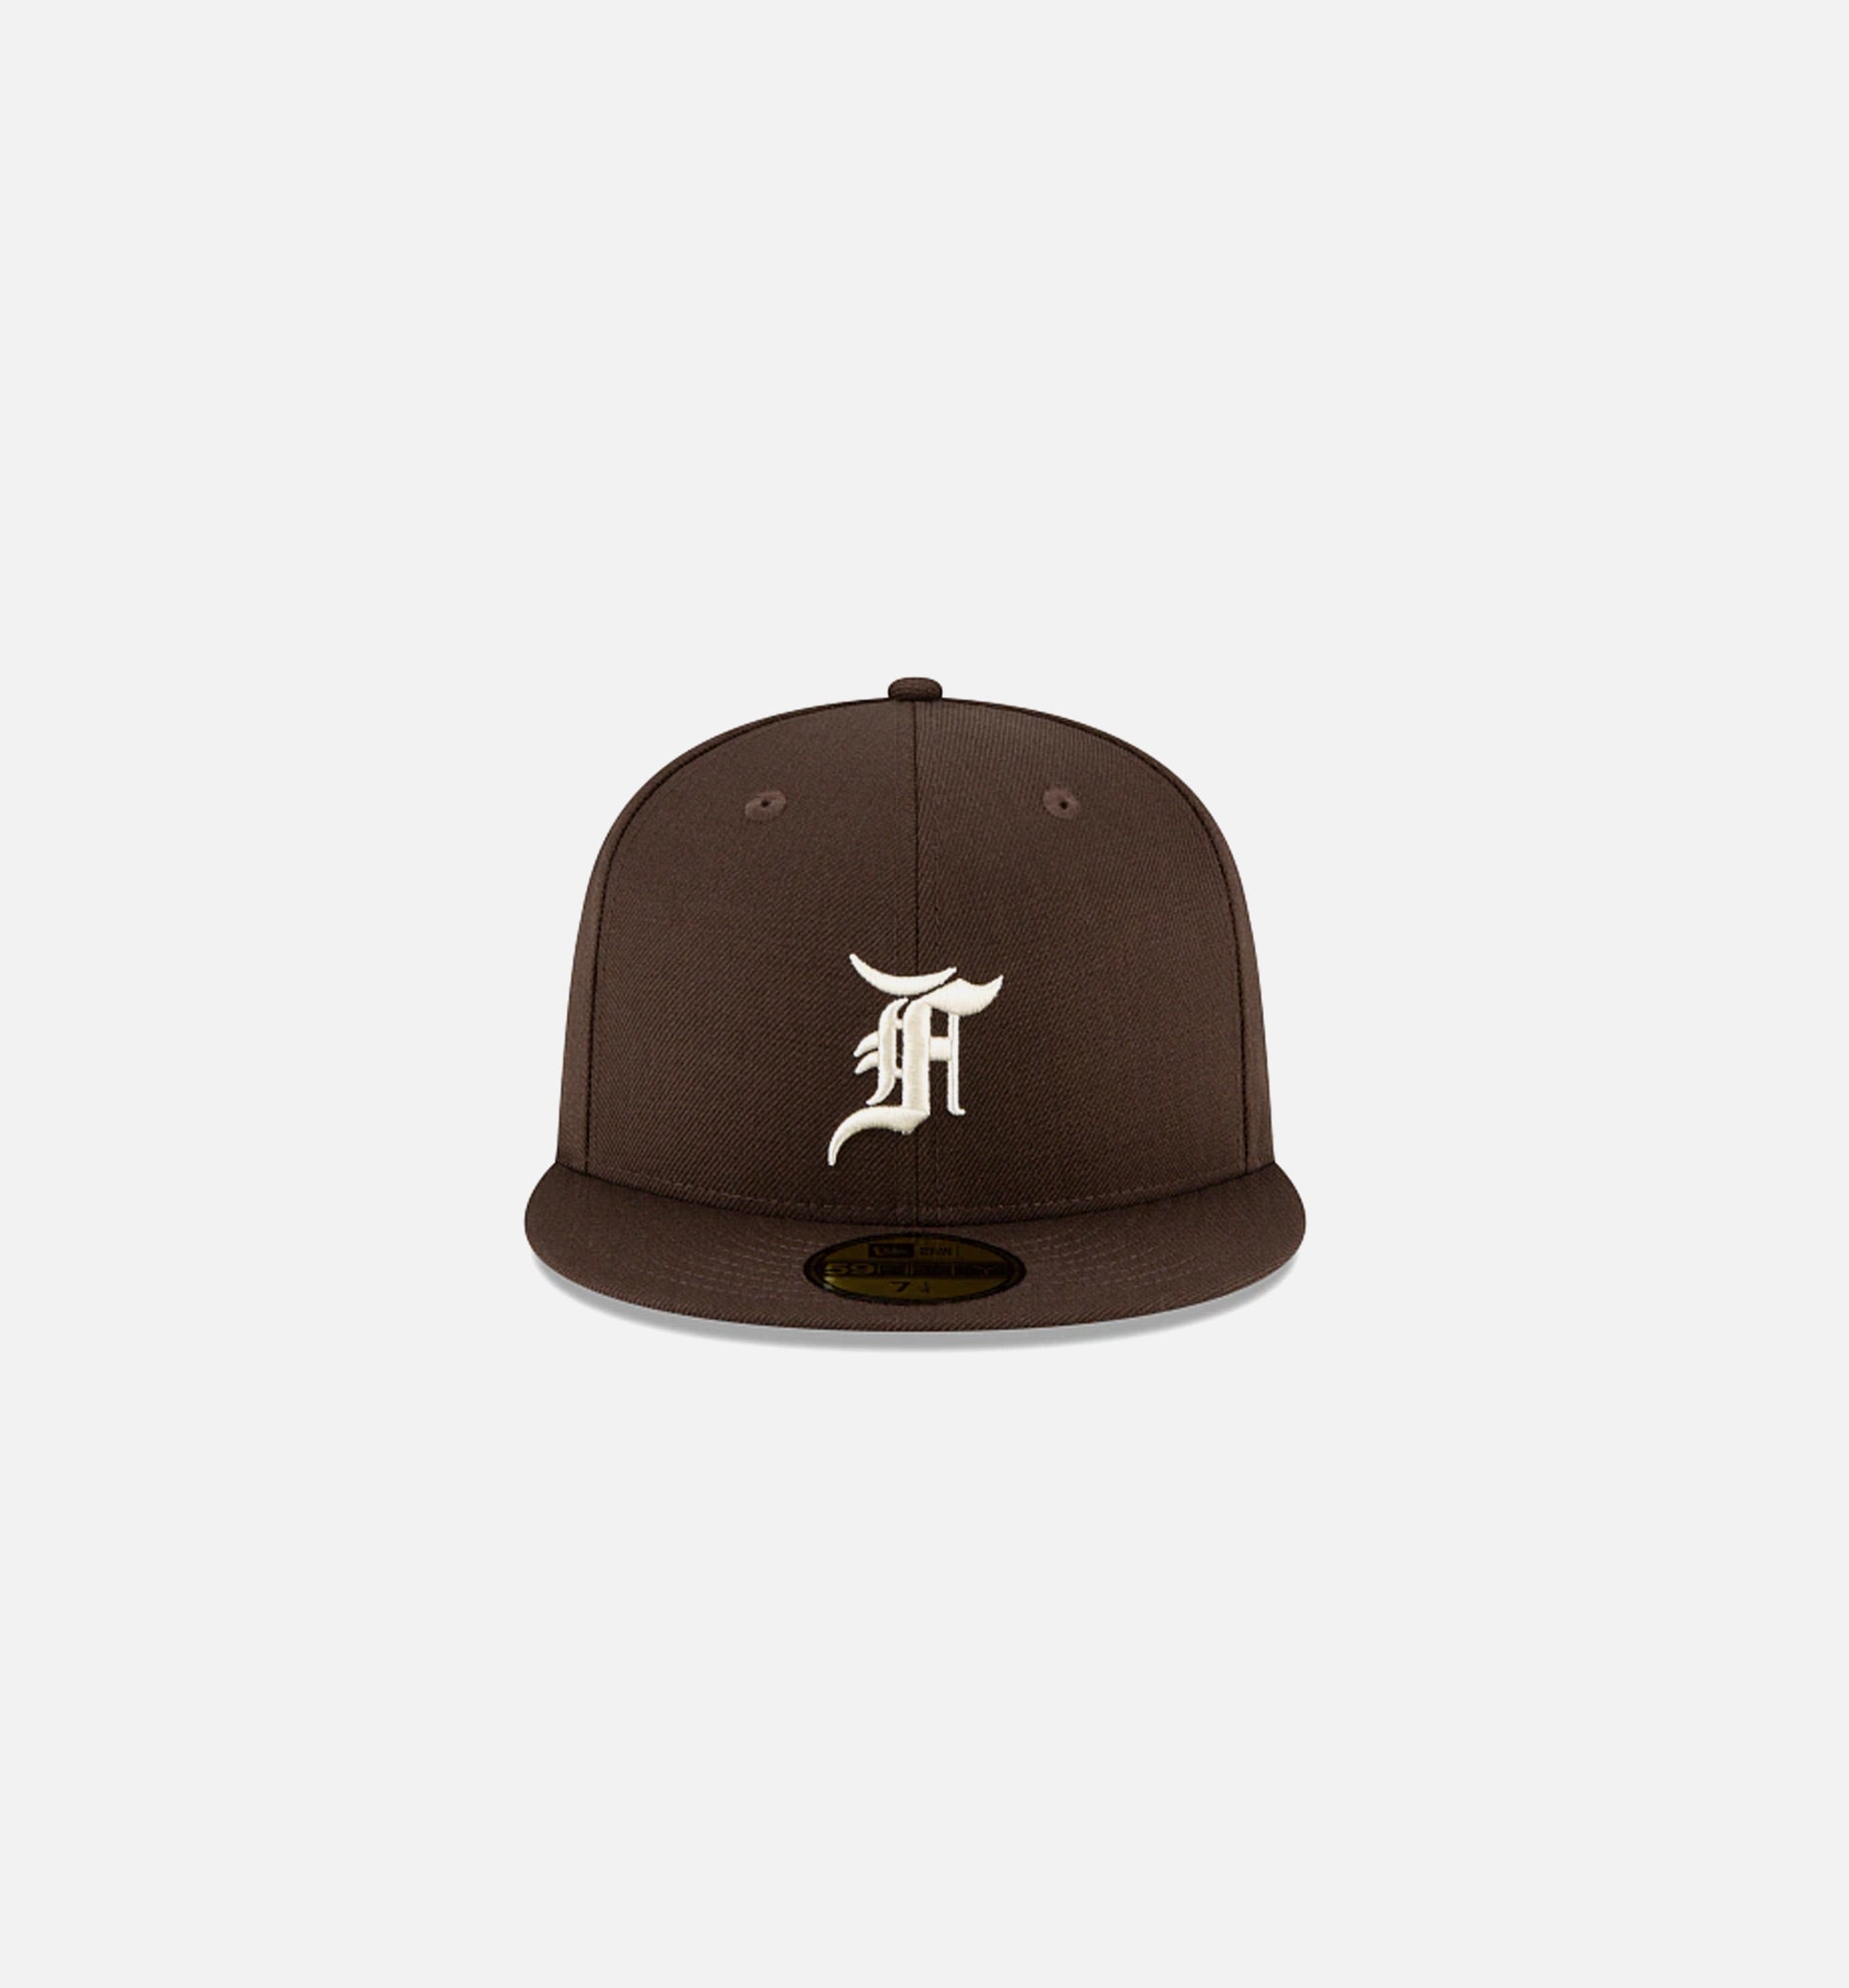 New Era x Fear of God Essentials Fitted Walnut | STASHED Brown / 7 3/8